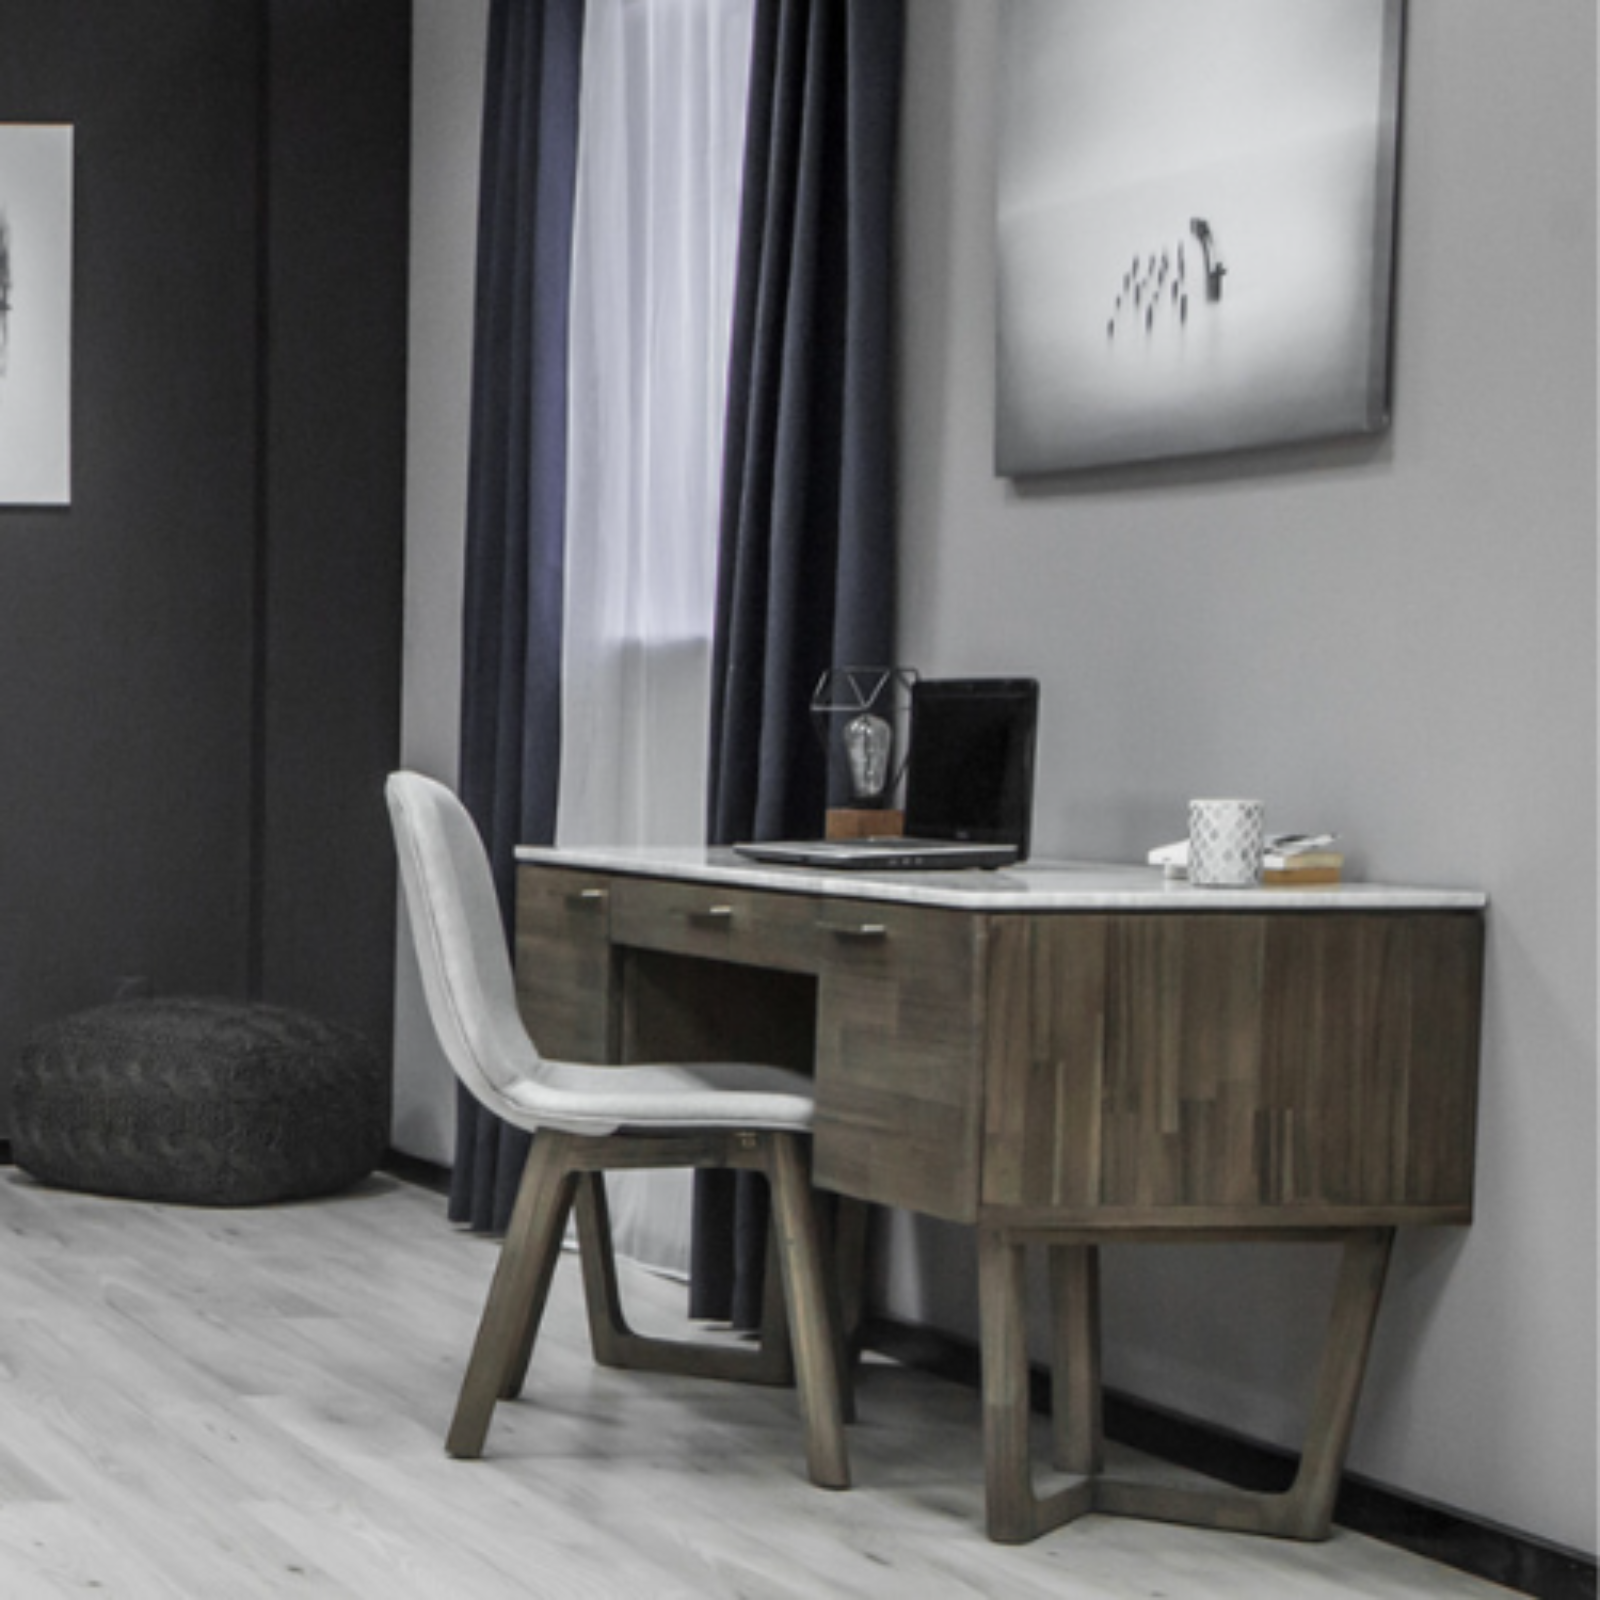 "Welcome the Aura Office Desk into your workspace - a beacon of modern design and practicality. Crafted from solid acacia wood with a Dark Greige Brushed and Brass finish. Italian Carrara Marble top, sturdy acacia frame, and distinctive V-shaped base. Generous display surface for showcasing essentials."